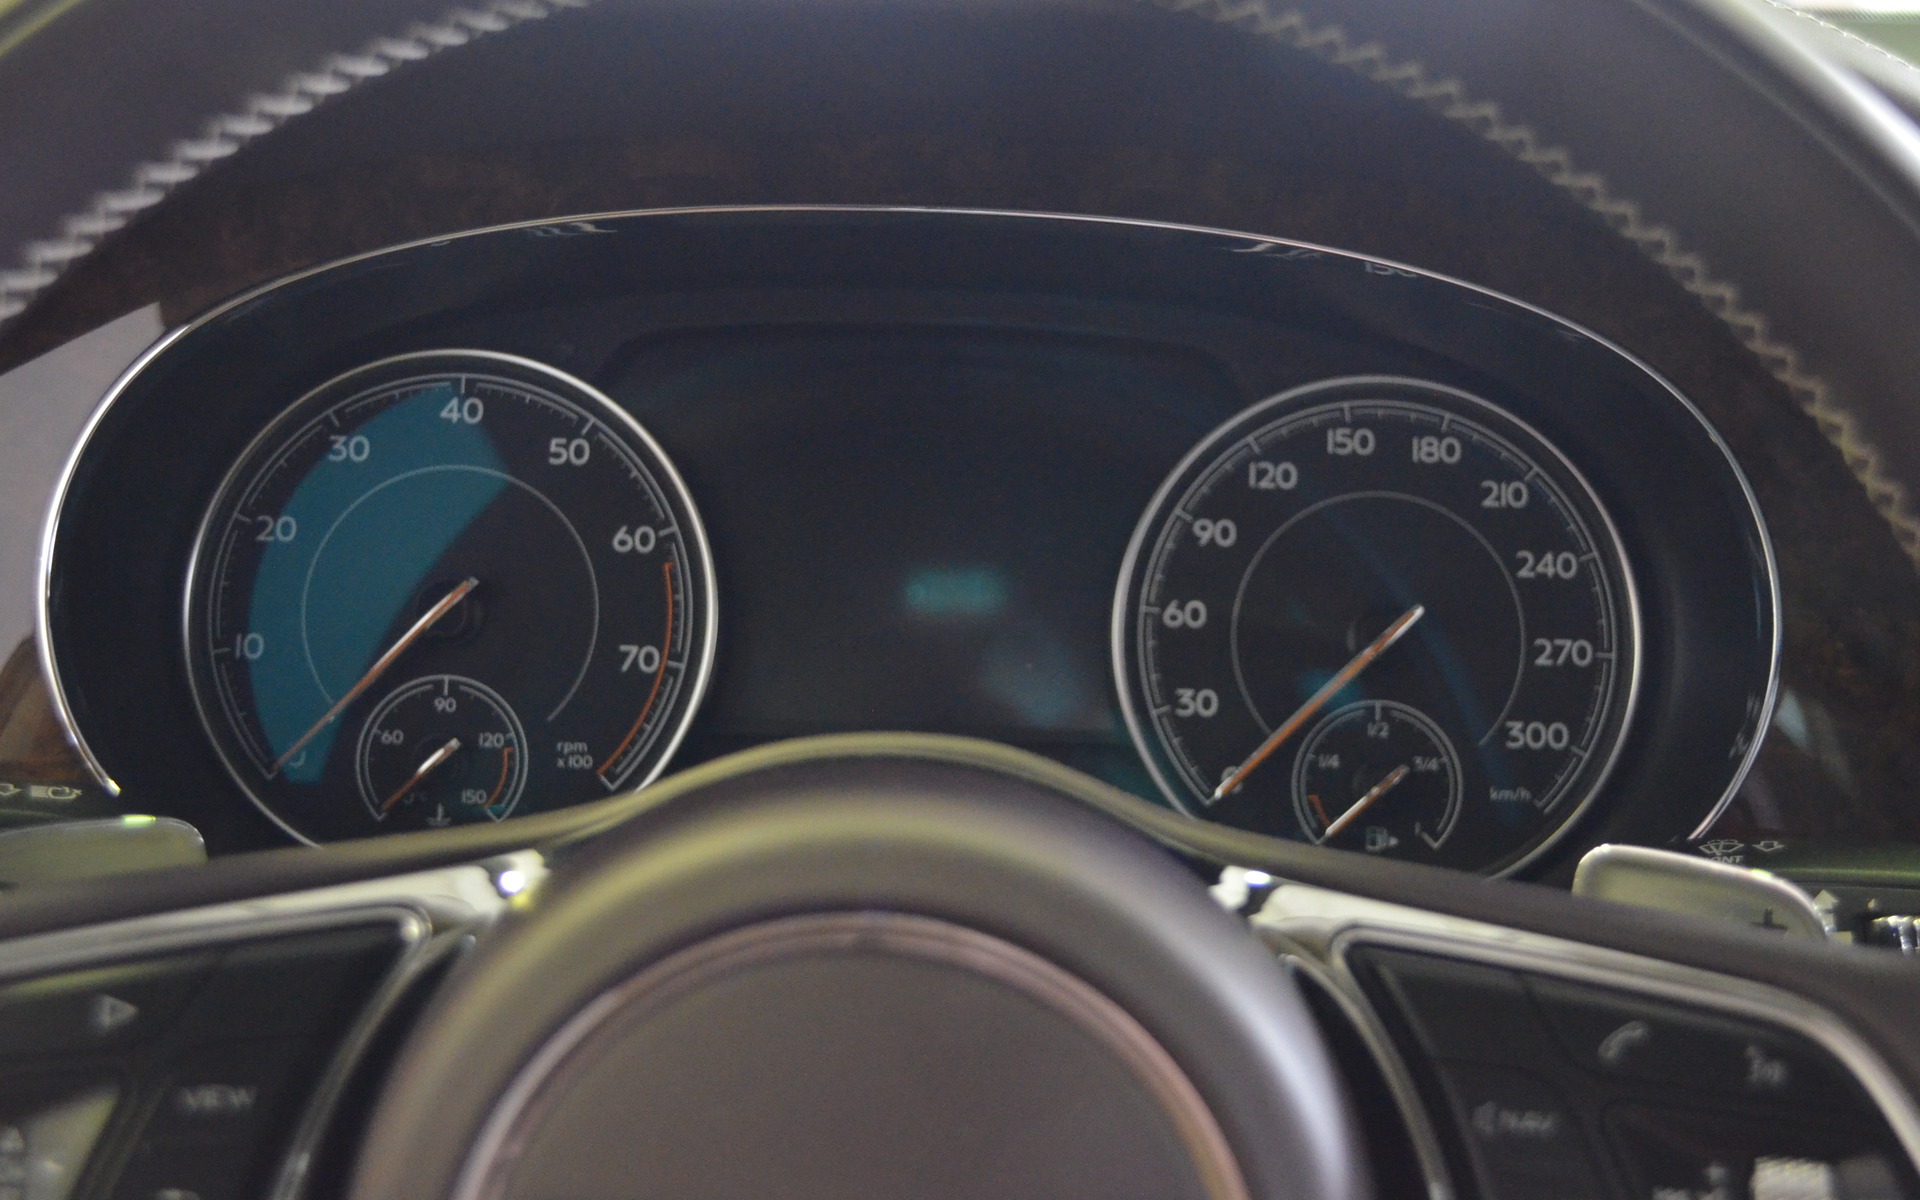 The 2017 Bentley Bentayga's gauges are charmingly simple.